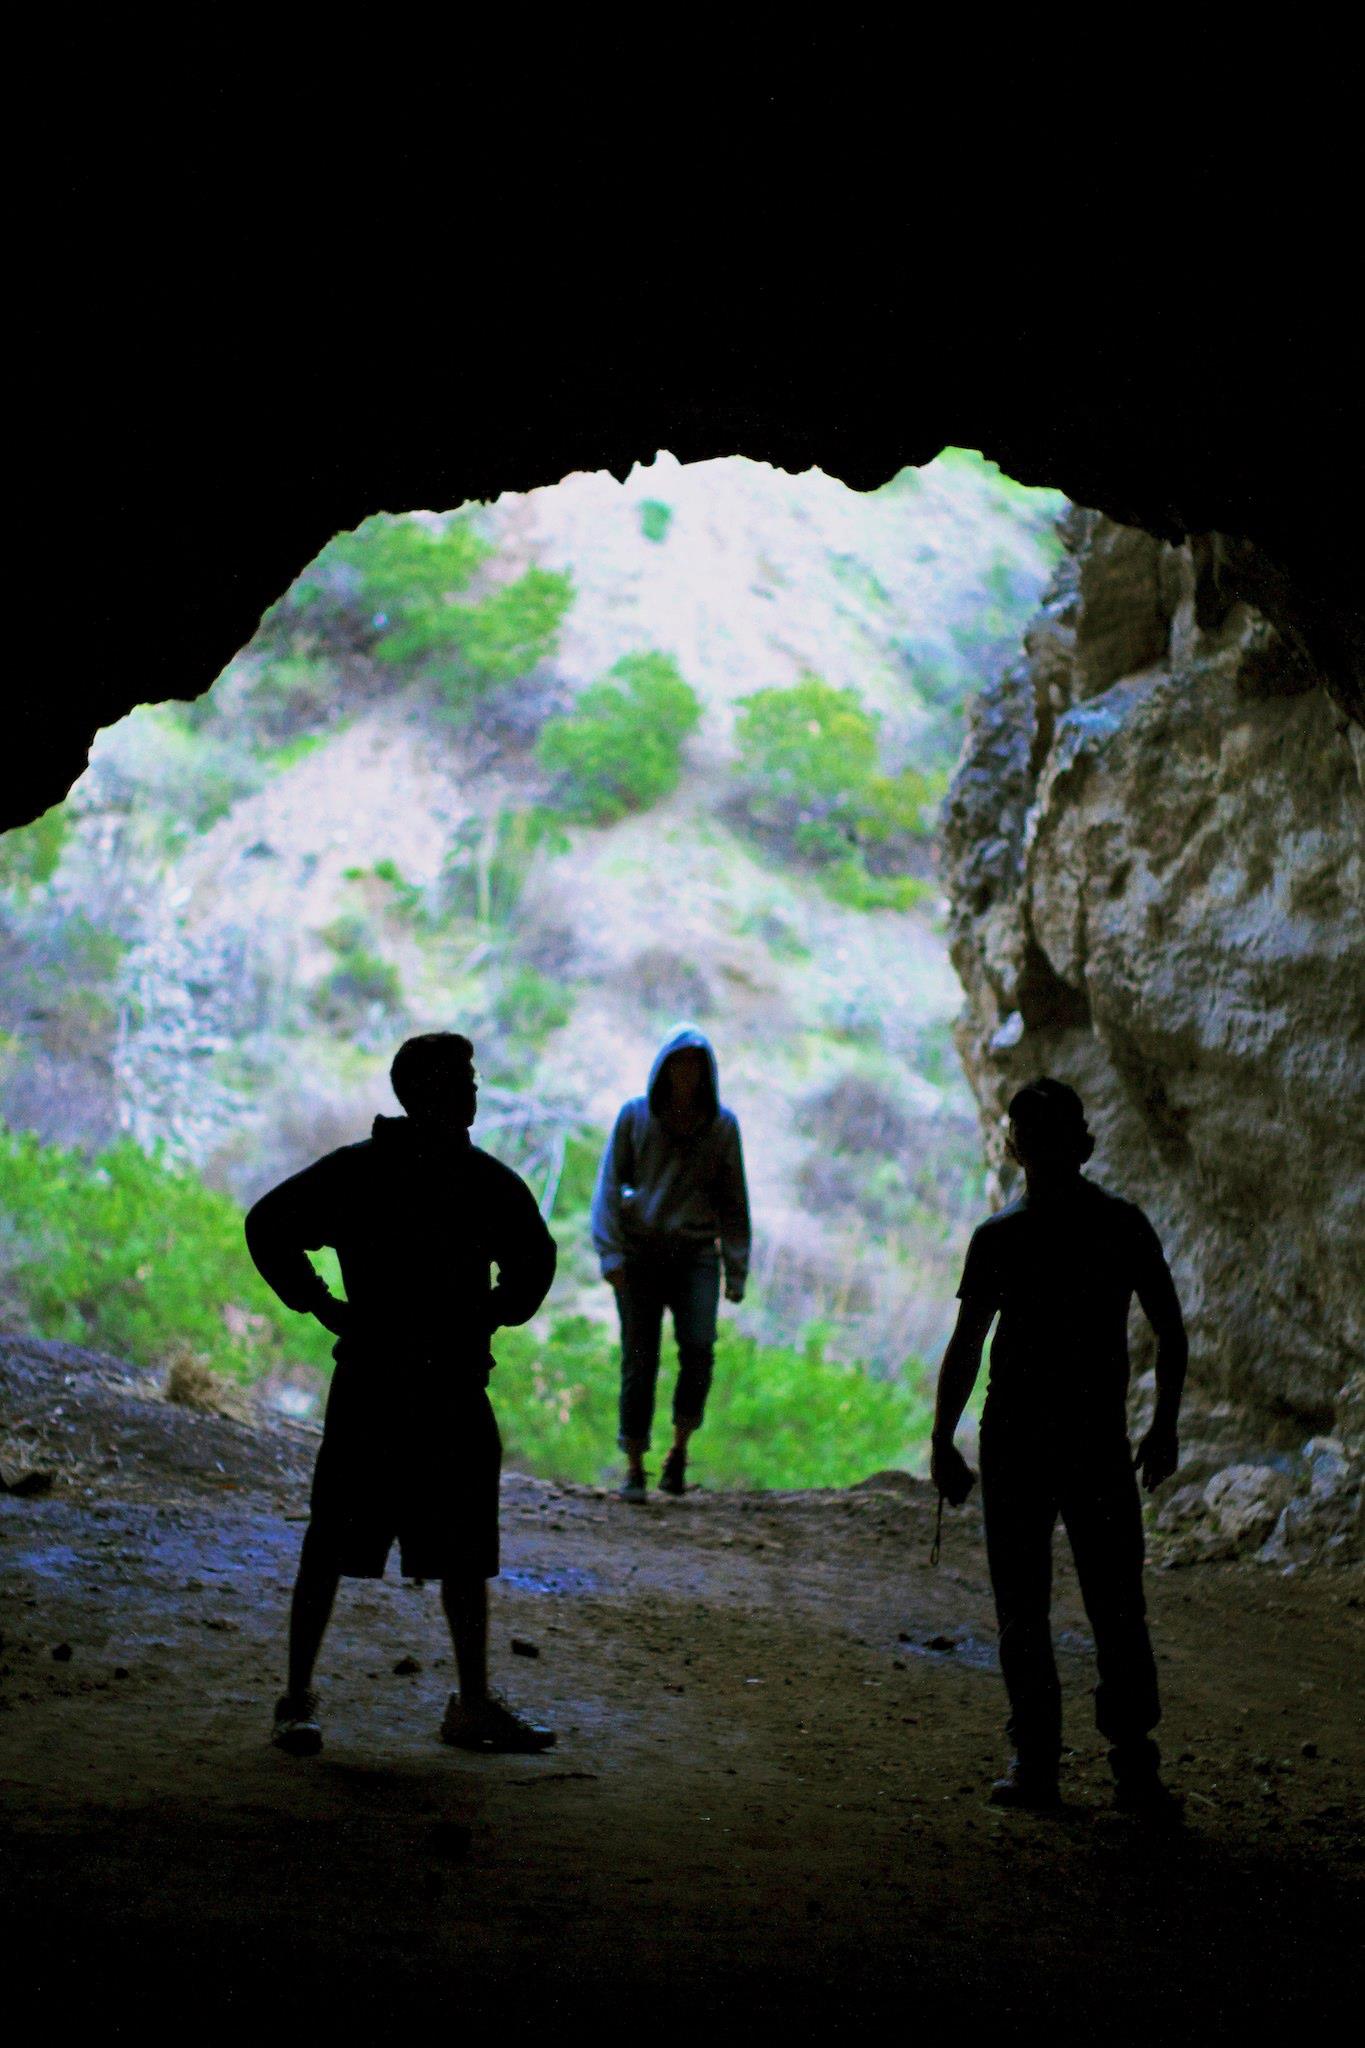 Scouting a location at Bronson Caves in Los Angeles, CA